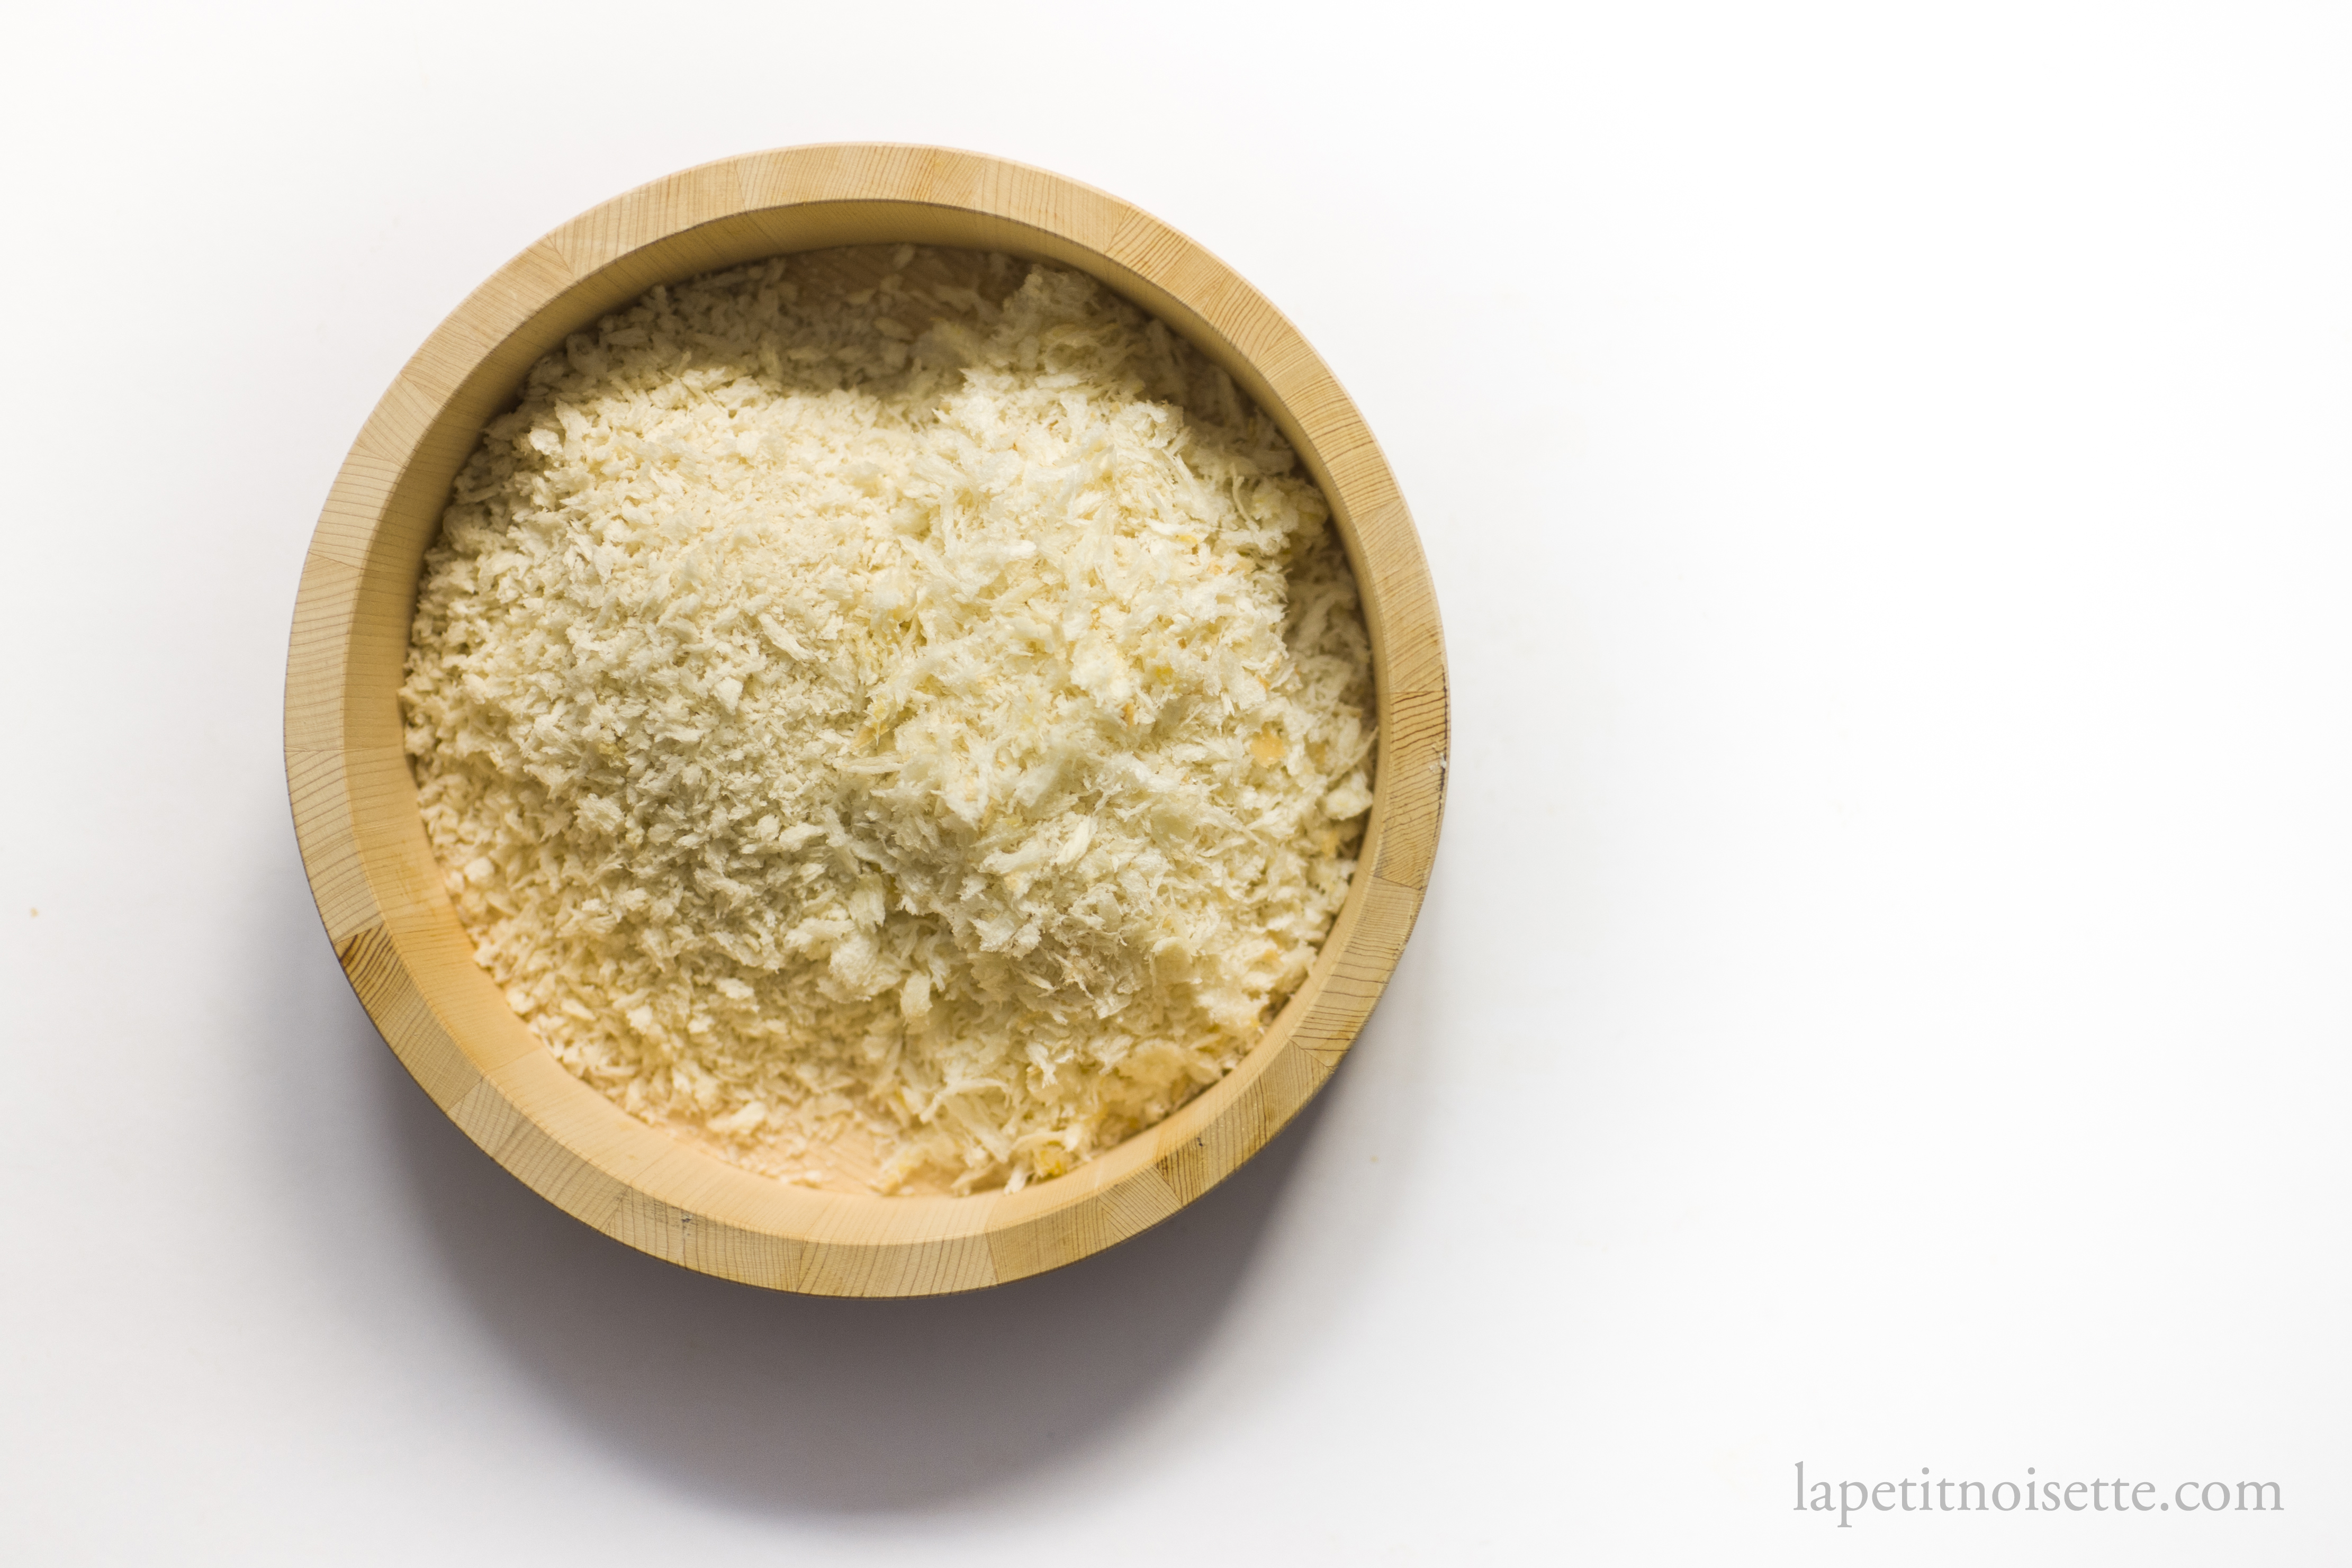 A side by side comparison of fresh and dried Japanese bread crumbs.